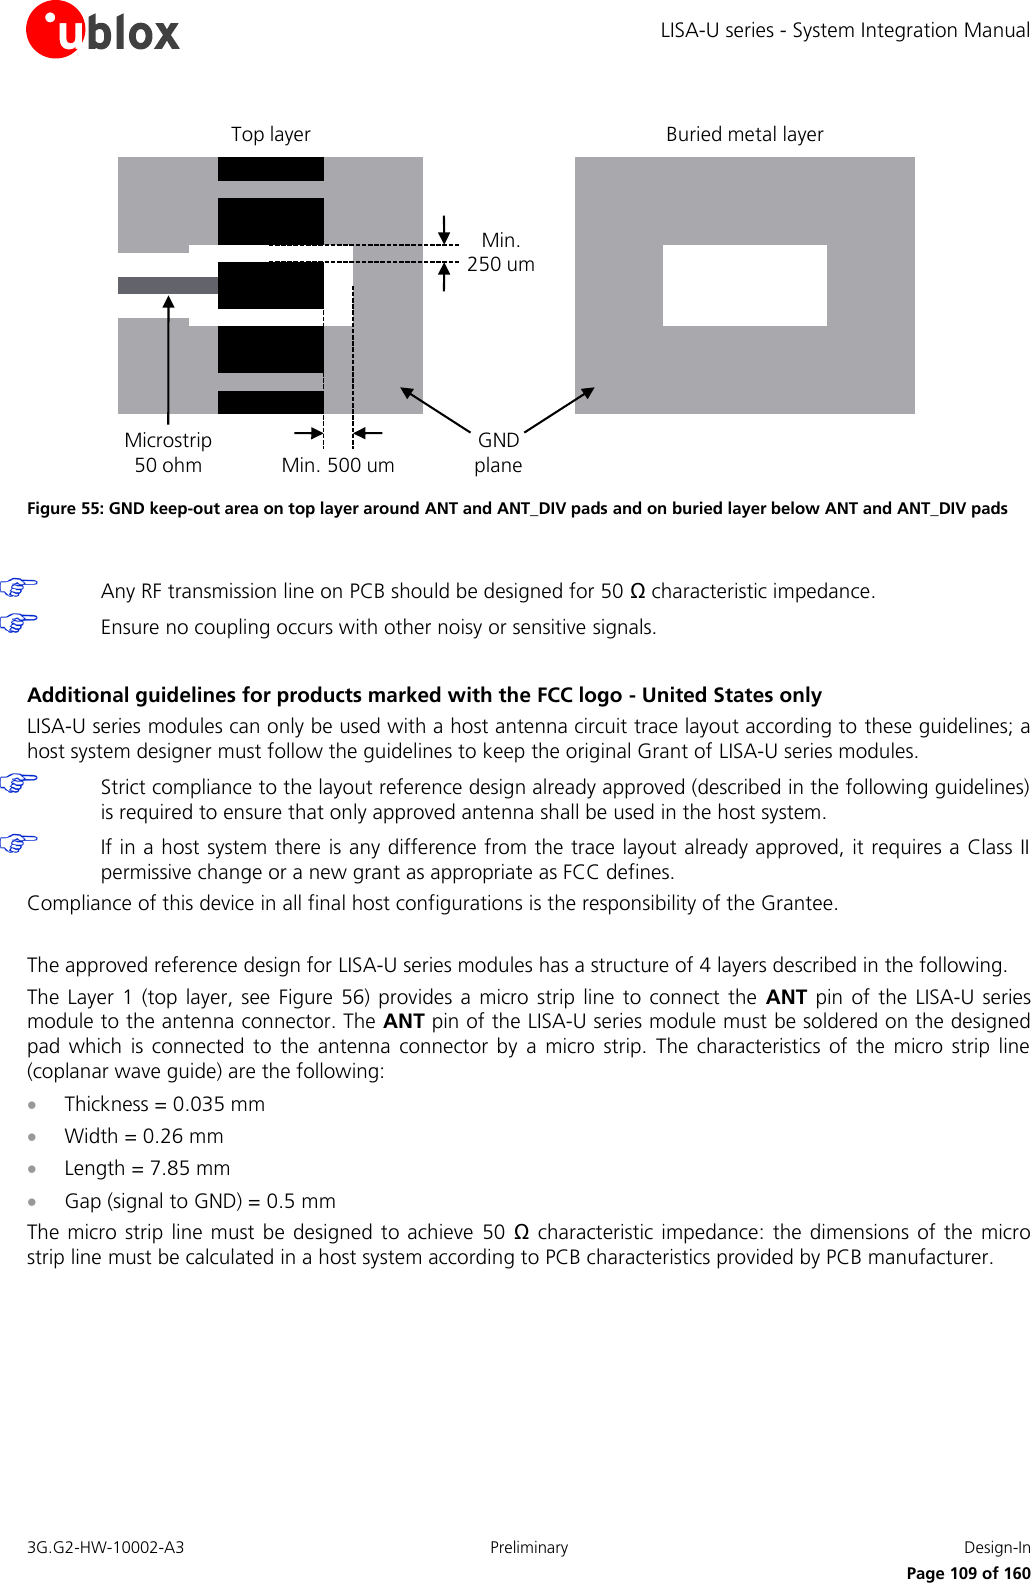 LISA-U series - System Integration Manual 3G.G2-HW-10002-A3  Preliminary  Design-In      Page 109 of 160 Min. 500 umMin. 250 umTop layer Buried metal layerGND planeMicrostrip50 ohm Figure 55: GND keep-out area on top layer around ANT and ANT_DIV pads and on buried layer below ANT and ANT_DIV pads   Any RF transmission line on PCB should be designed for 50 Ω characteristic impedance.  Ensure no coupling occurs with other noisy or sensitive signals.  Additional guidelines for products marked with the FCC logo - United States only LISA-U series modules can only be used with a host antenna circuit trace layout according to these guidelines; a host system designer must follow the guidelines to keep the original Grant of LISA-U series modules.  Strict compliance to the layout reference design already approved (described in the following guidelines) is required to ensure that only approved antenna shall be used in the host system.  If in a host system there is any difference from the trace layout already approved, it requires a Class II permissive change or a new grant as appropriate as FCC defines. Compliance of this device in all final host configurations is the responsibility of the Grantee.  The approved reference design for LISA-U series modules has a structure of 4 layers described in the following. The  Layer 1  (top layer,  see Figure  56) provides  a micro  strip line to  connect the  ANT pin  of the  LISA-U series module to the antenna connector. The ANT pin of the LISA-U series module must be soldered on the designed pad  which  is connected  to  the  antenna  connector  by  a micro  strip.  The  characteristics  of the  micro  strip  line (coplanar wave guide) are the following:  Thickness = 0.035 mm  Width = 0.26 mm  Length = 7.85 mm  Gap (signal to GND) = 0.5 mm The micro strip line must  be designed to achieve  50  Ω characteristic impedance: the  dimensions  of  the micro strip line must be calculated in a host system according to PCB characteristics provided by PCB manufacturer. 